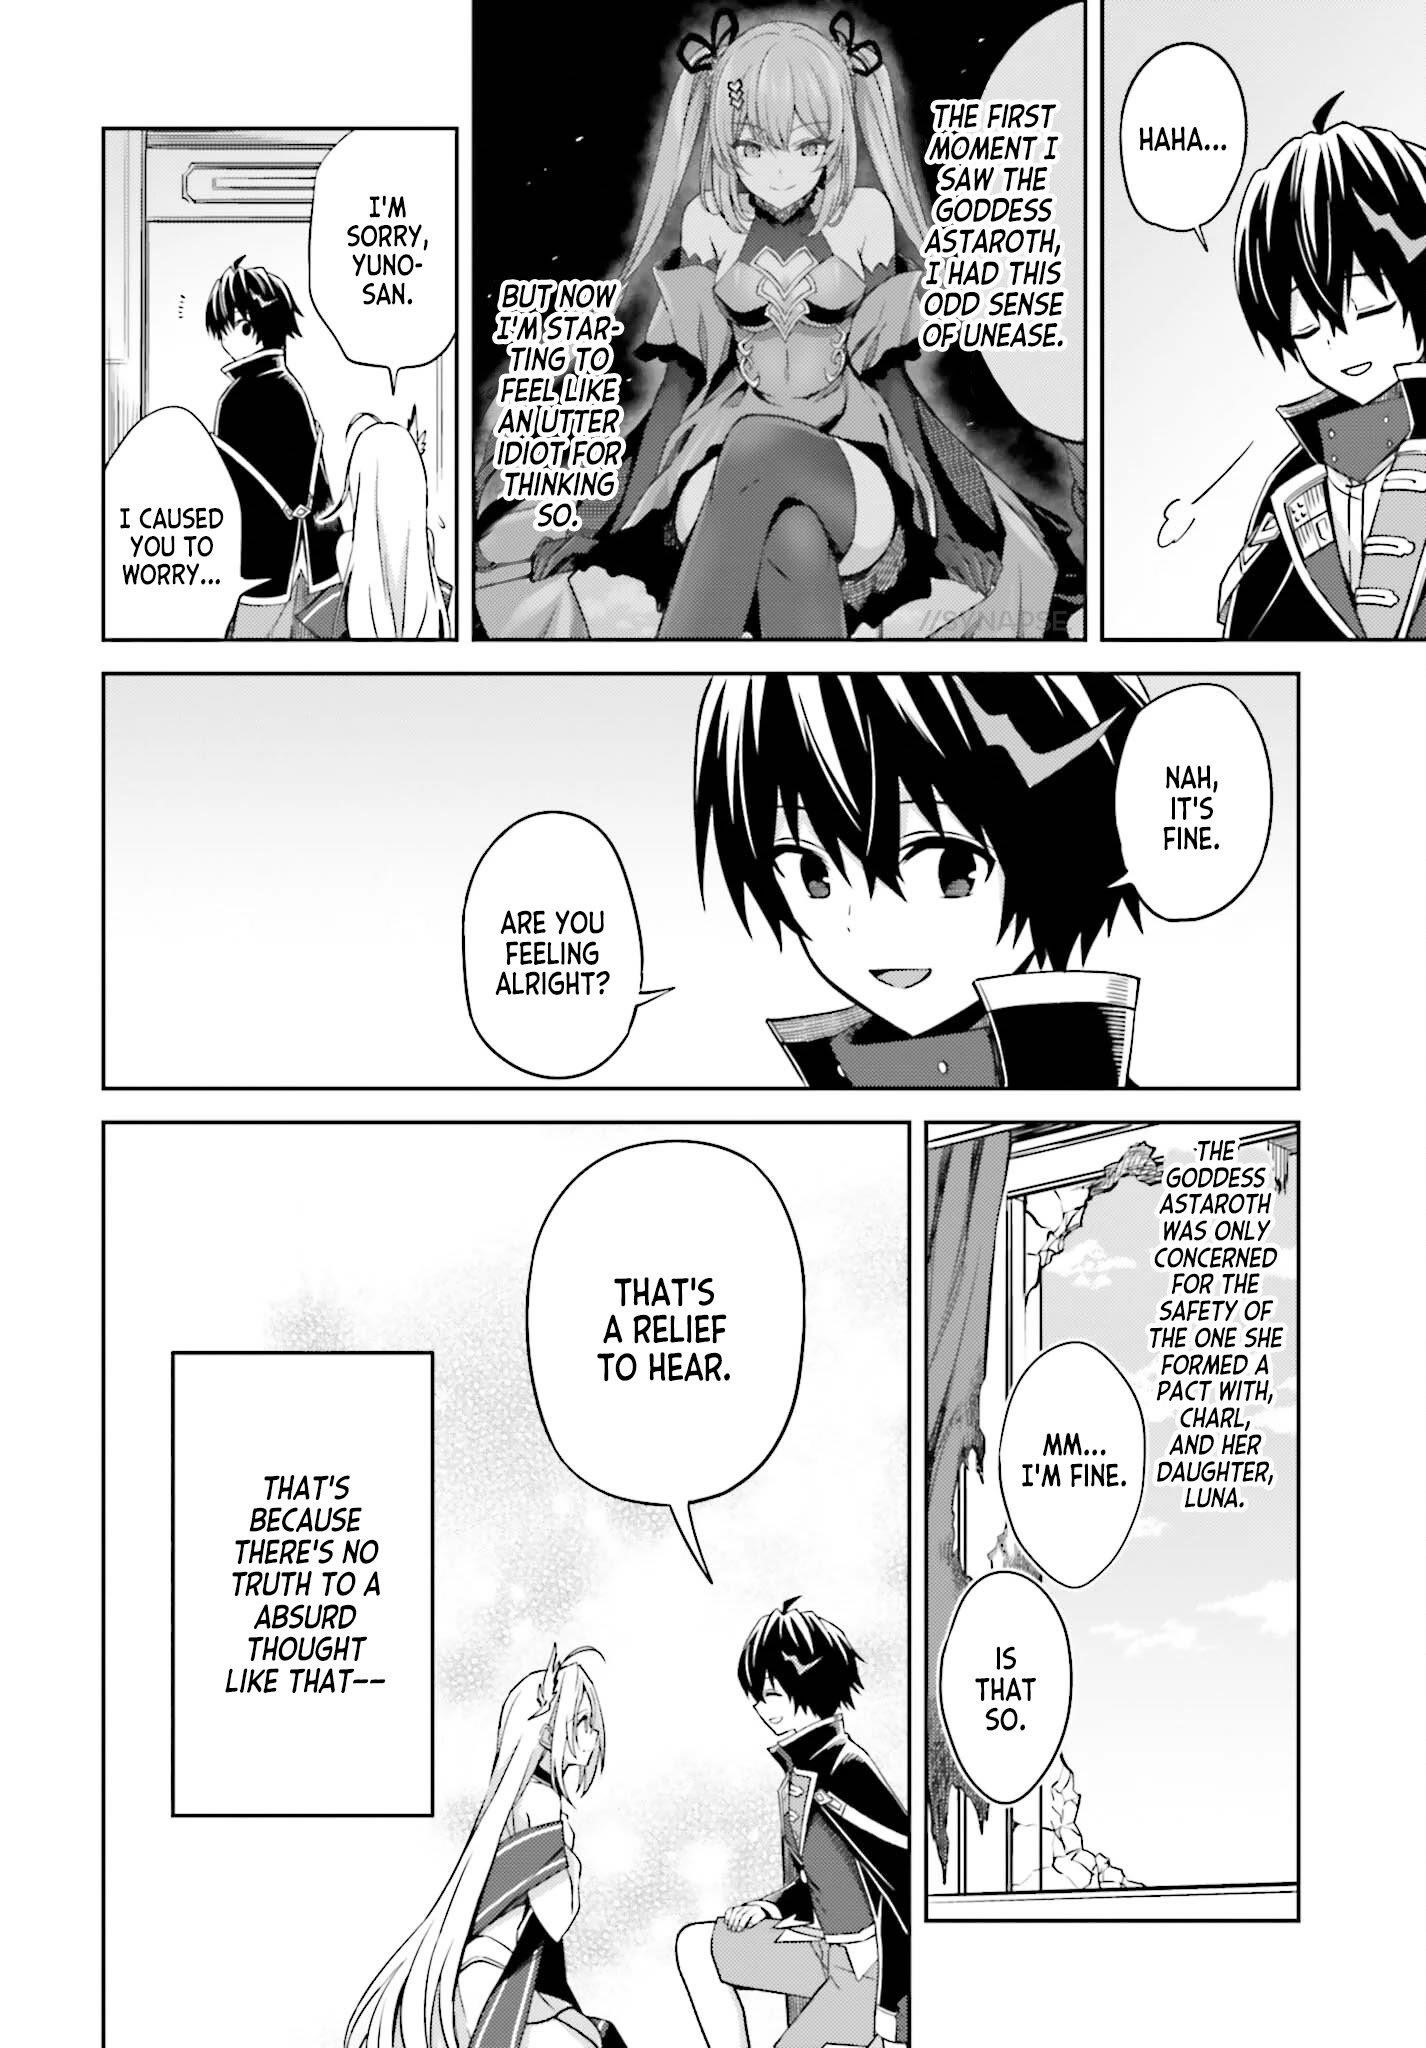 Read Manga I Think I’ll Hide My True Ability to the Last Moment - Chapter 7